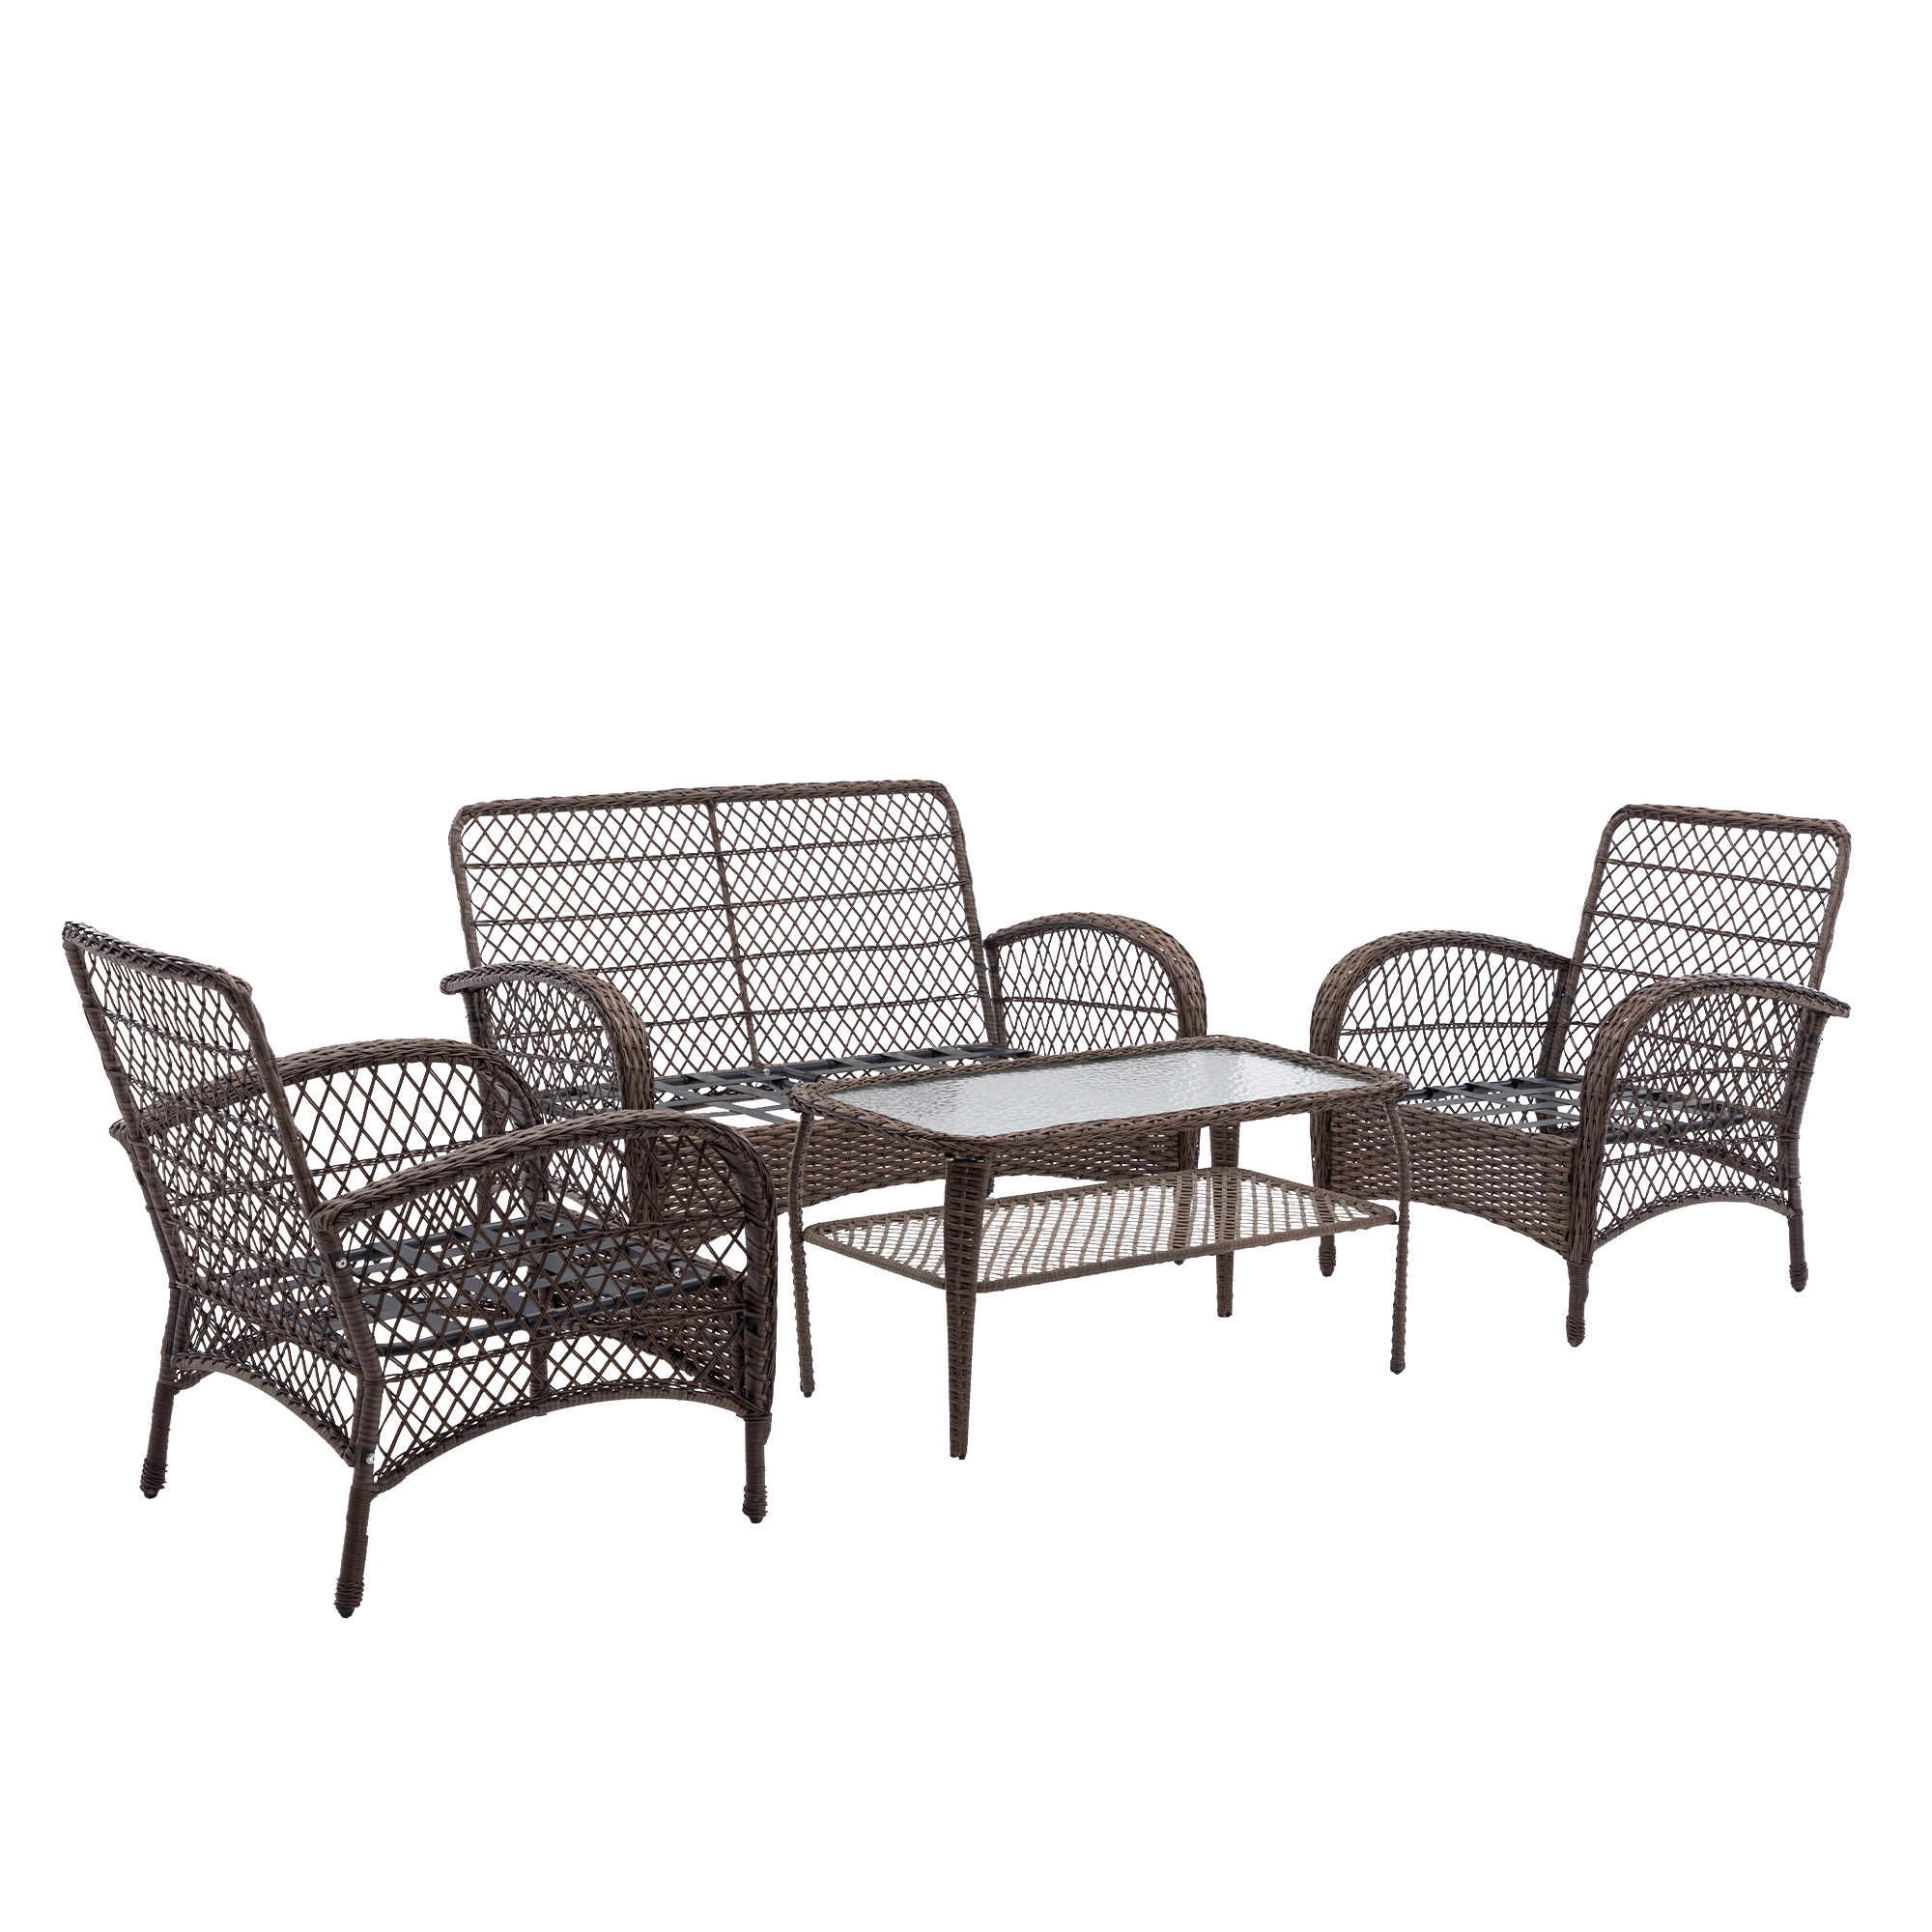 4 Pieces Outdoor Wicker Conversation Set, All-Weather Rattan Patio Furniture Sets with Arm Chairs, Tempered Glass Table, Cushions, Sectional Sofa Set for Backyard, Garden, Poolside, TR07 - image 4 of 9